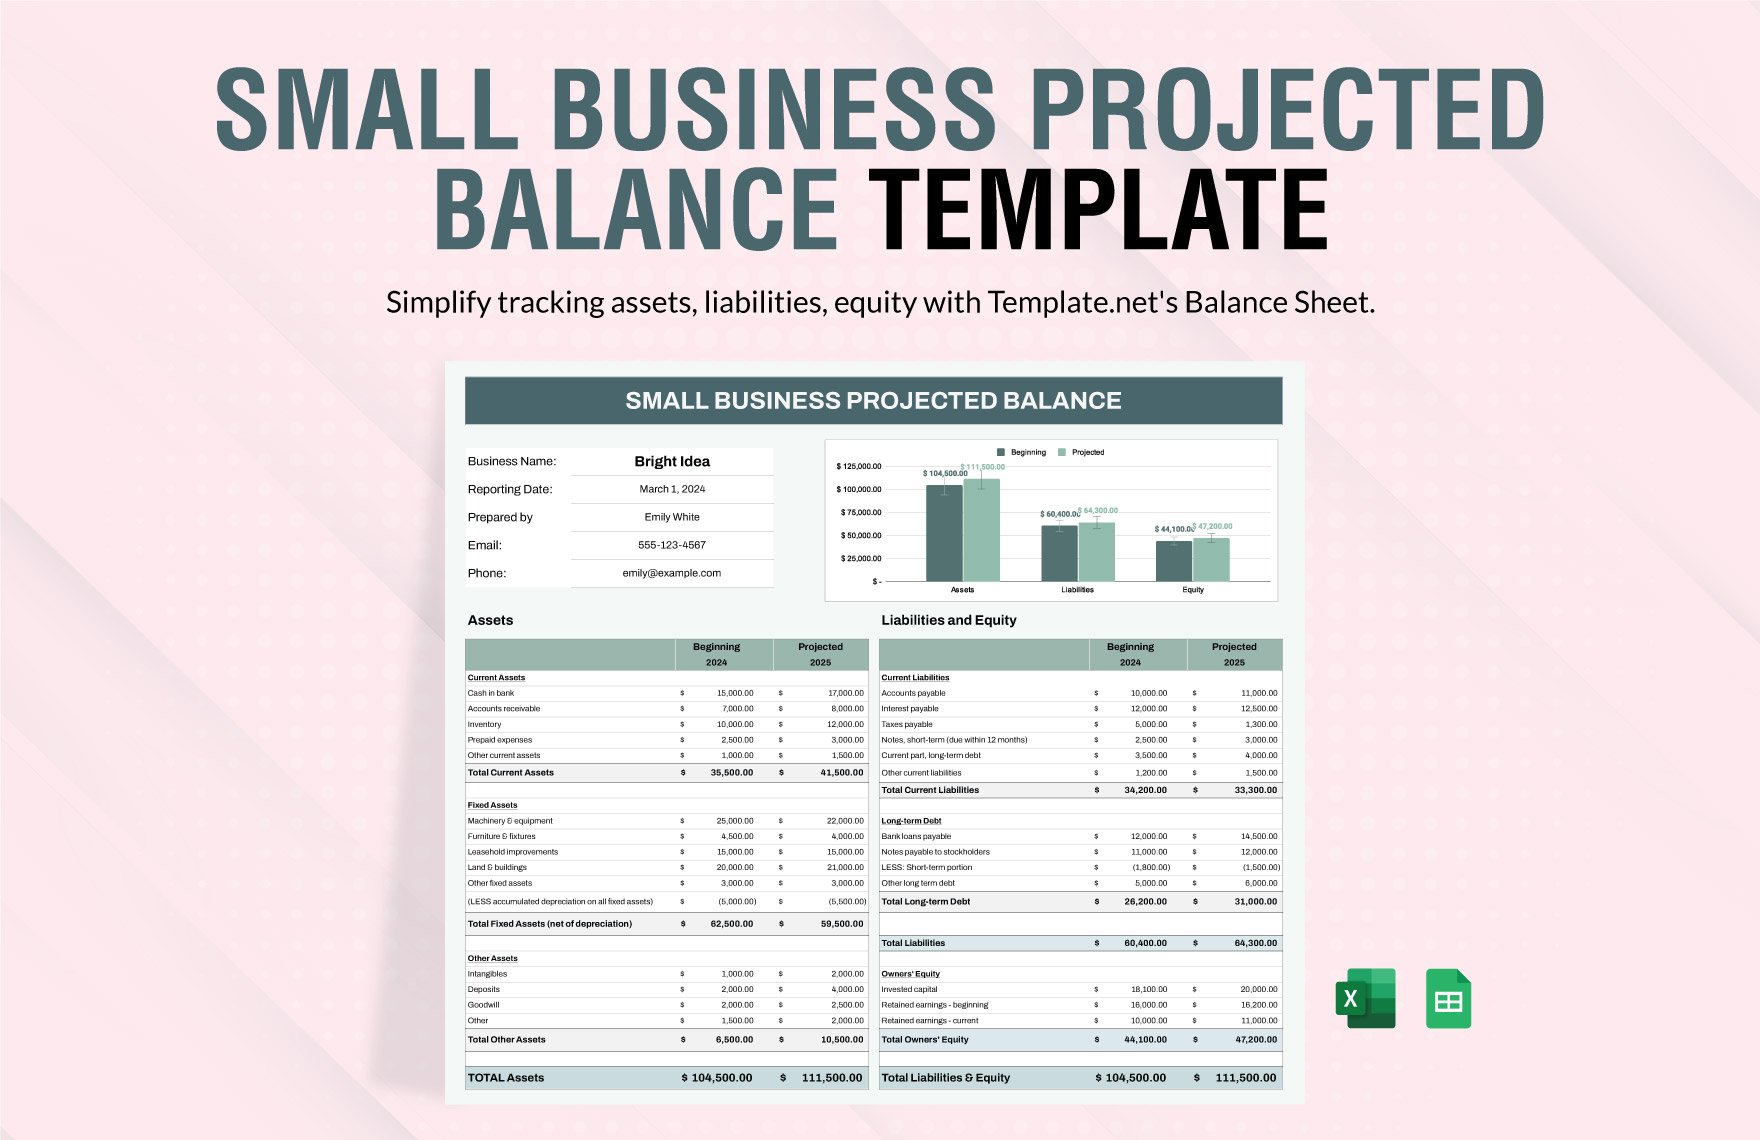 Small Business Projected Balance Template